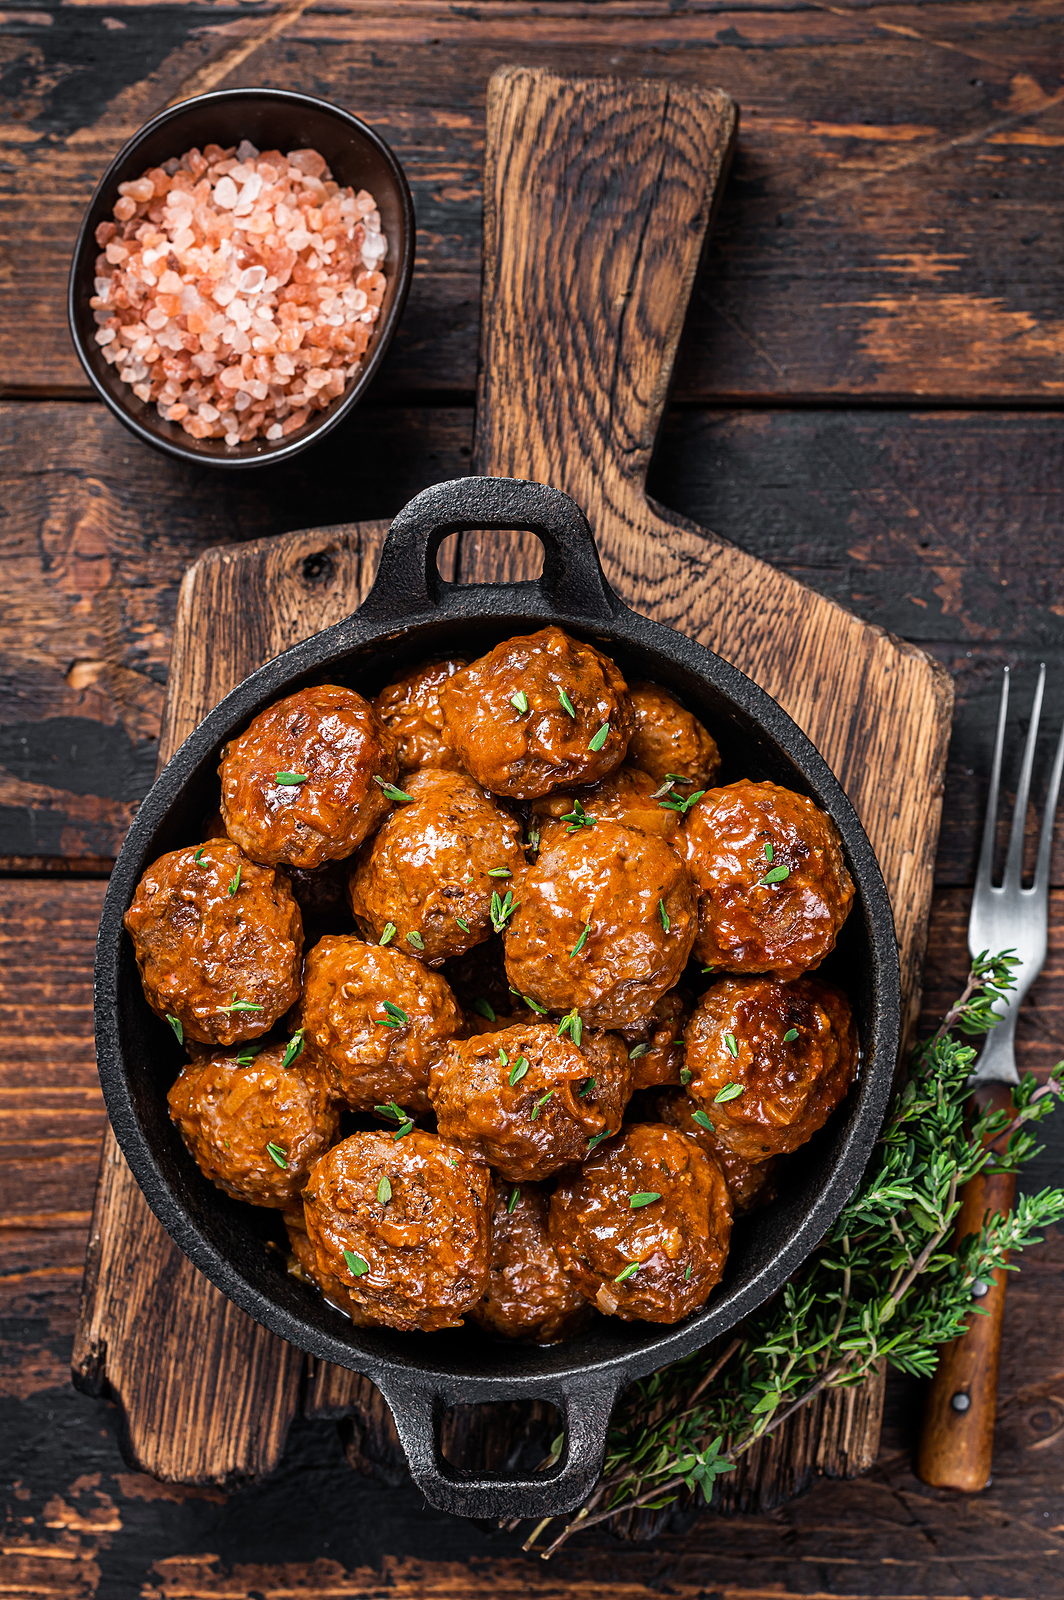 Pan-seared lamb meatballs with thyme in cast iron pan. Dark background. Top view